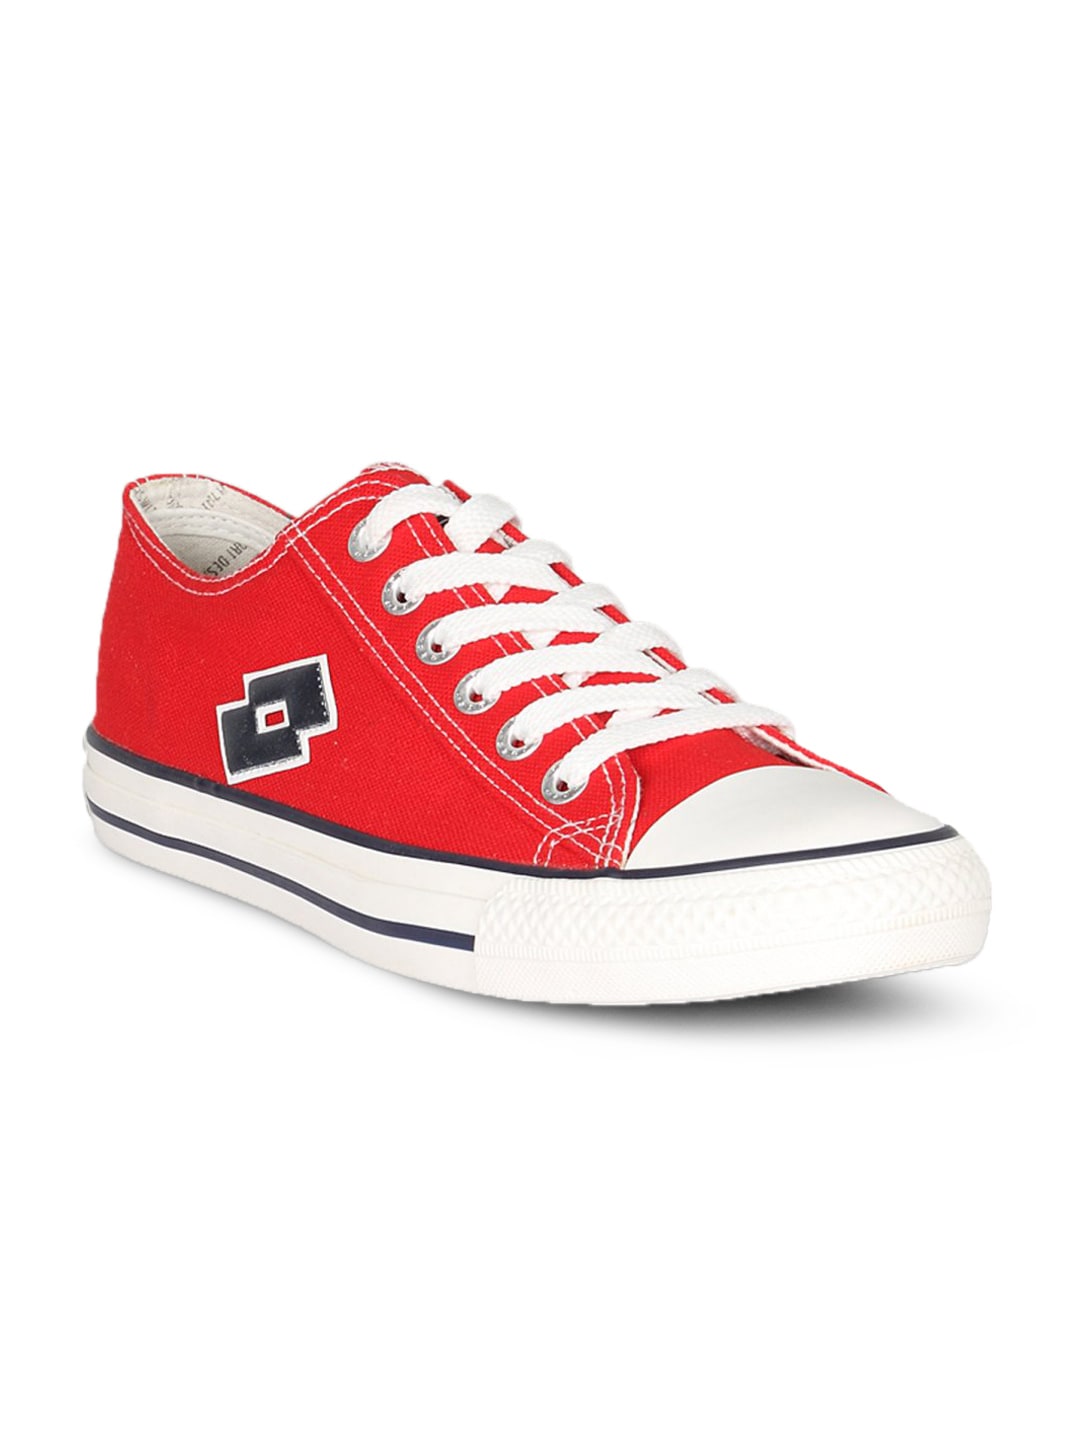 Lotto Unisex Canvas Red White Shoe